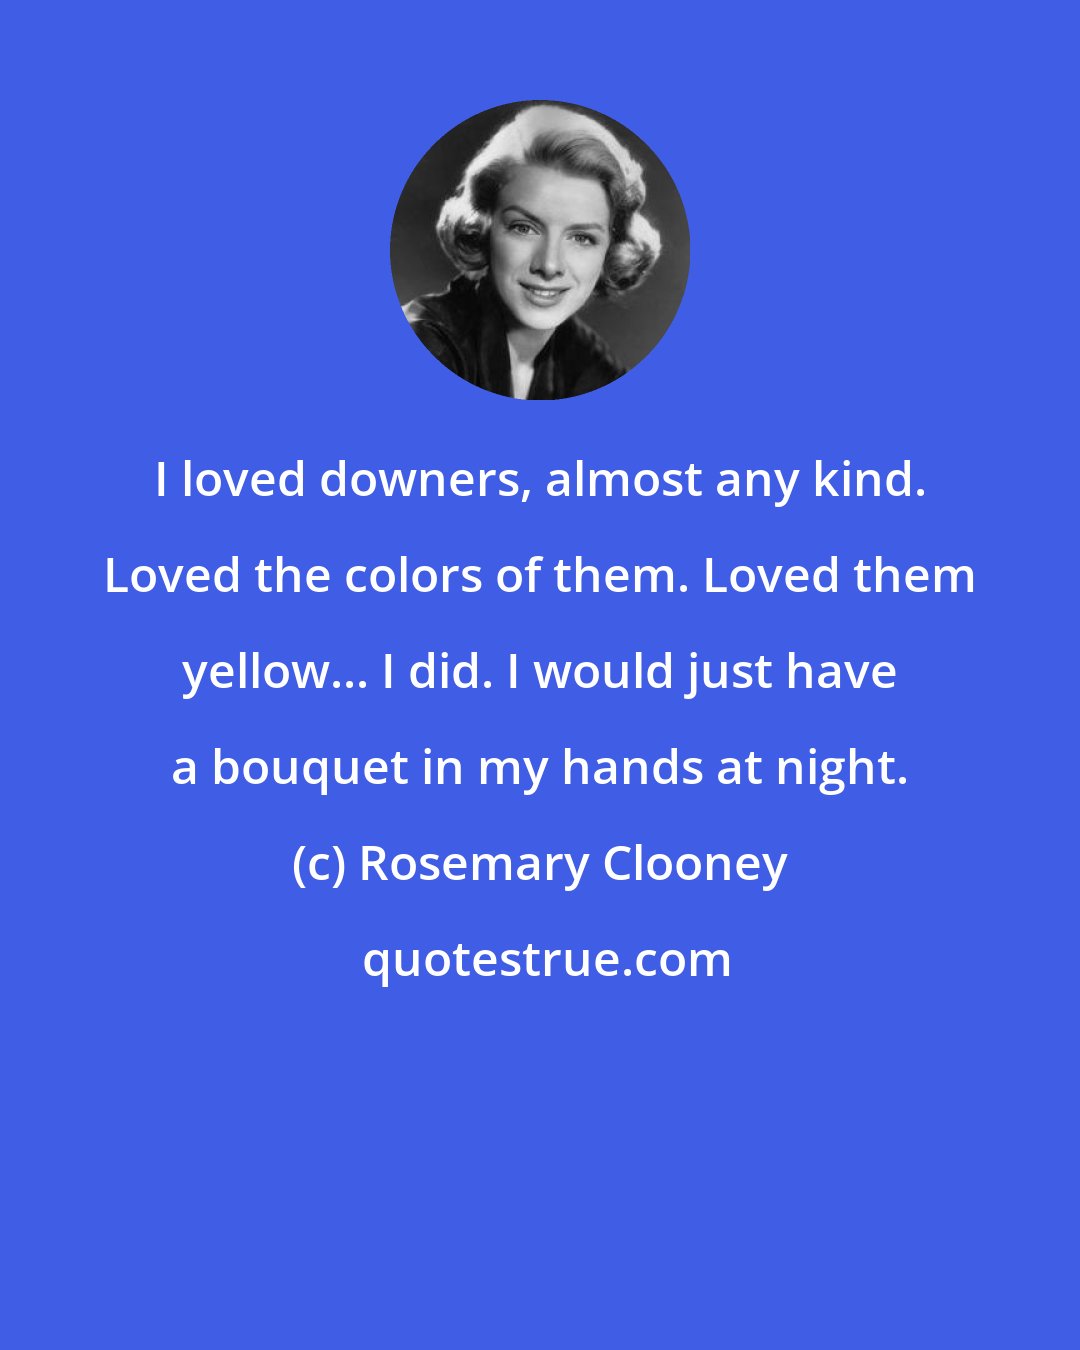 Rosemary Clooney: I loved downers, almost any kind. Loved the colors of them. Loved them yellow... I did. I would just have a bouquet in my hands at night.